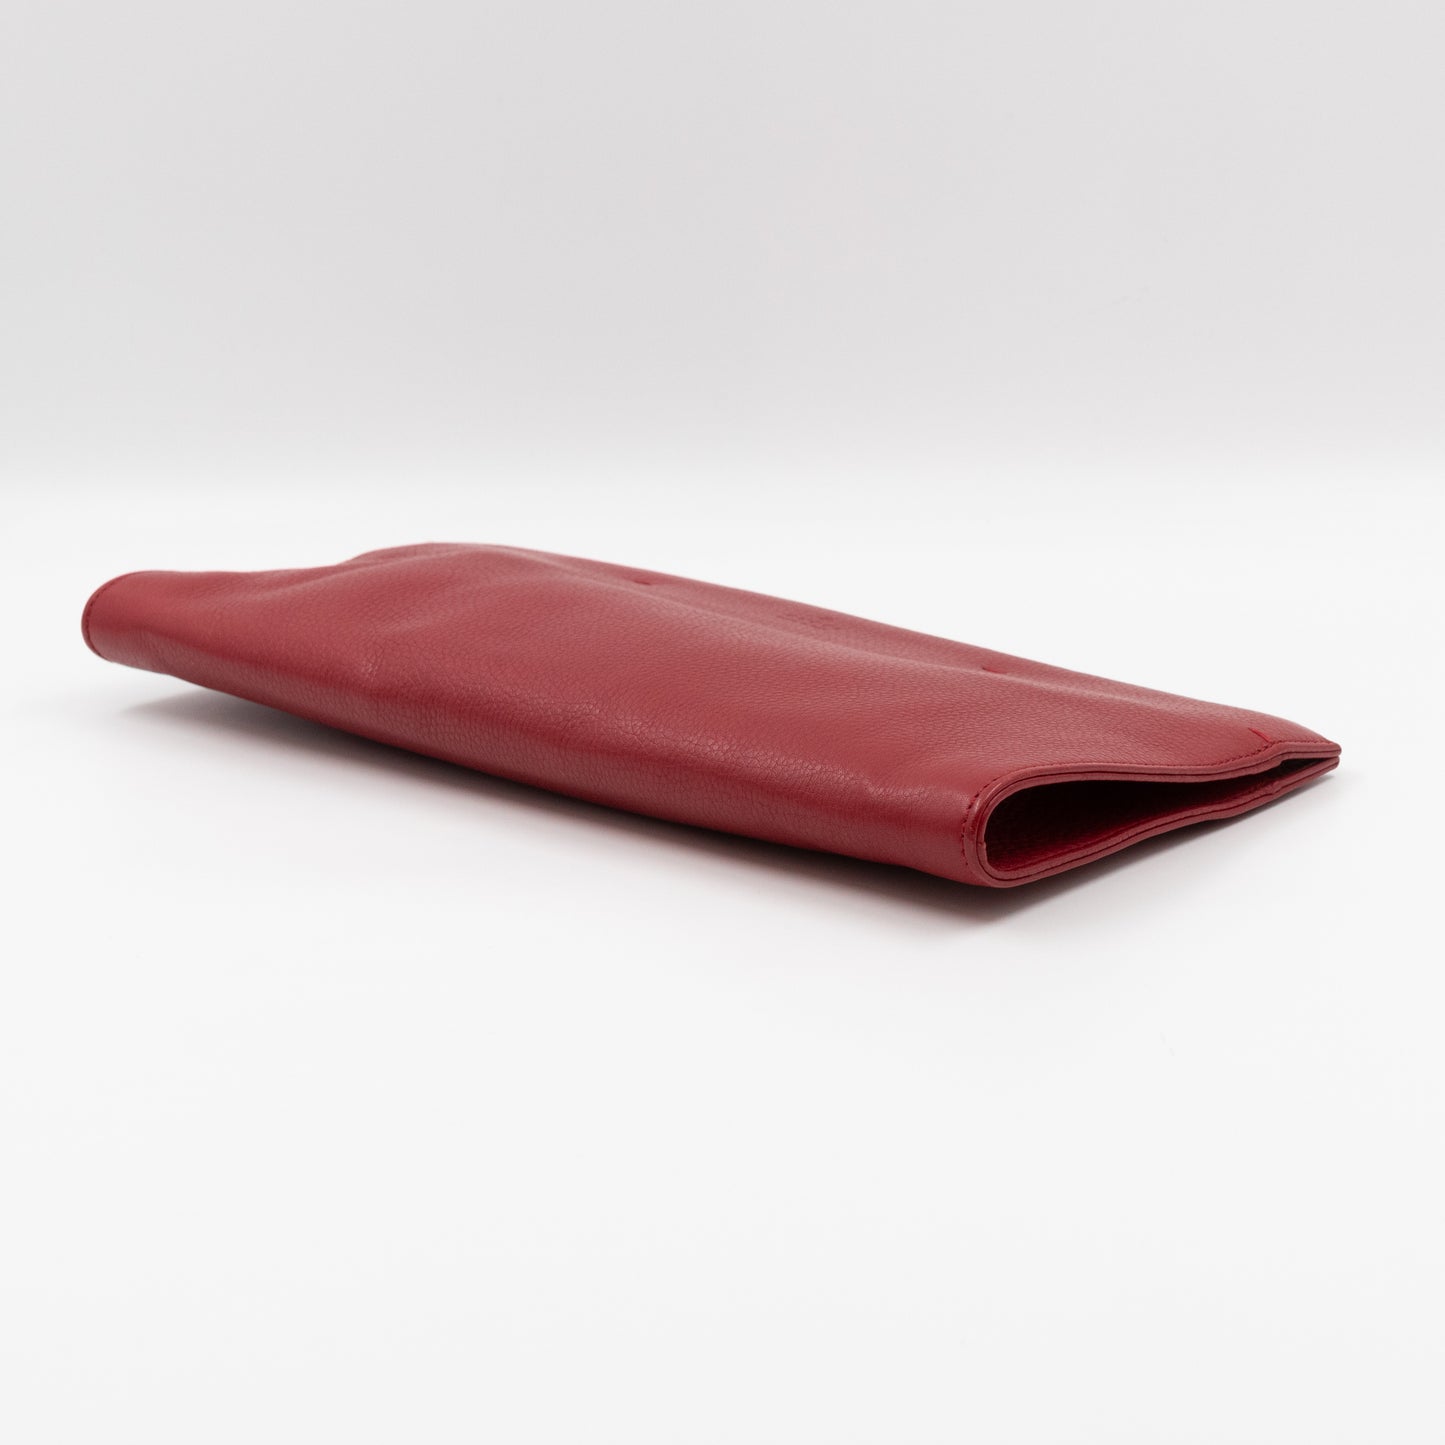 Nouveau Bamboo Tassel Clutch Red Leather